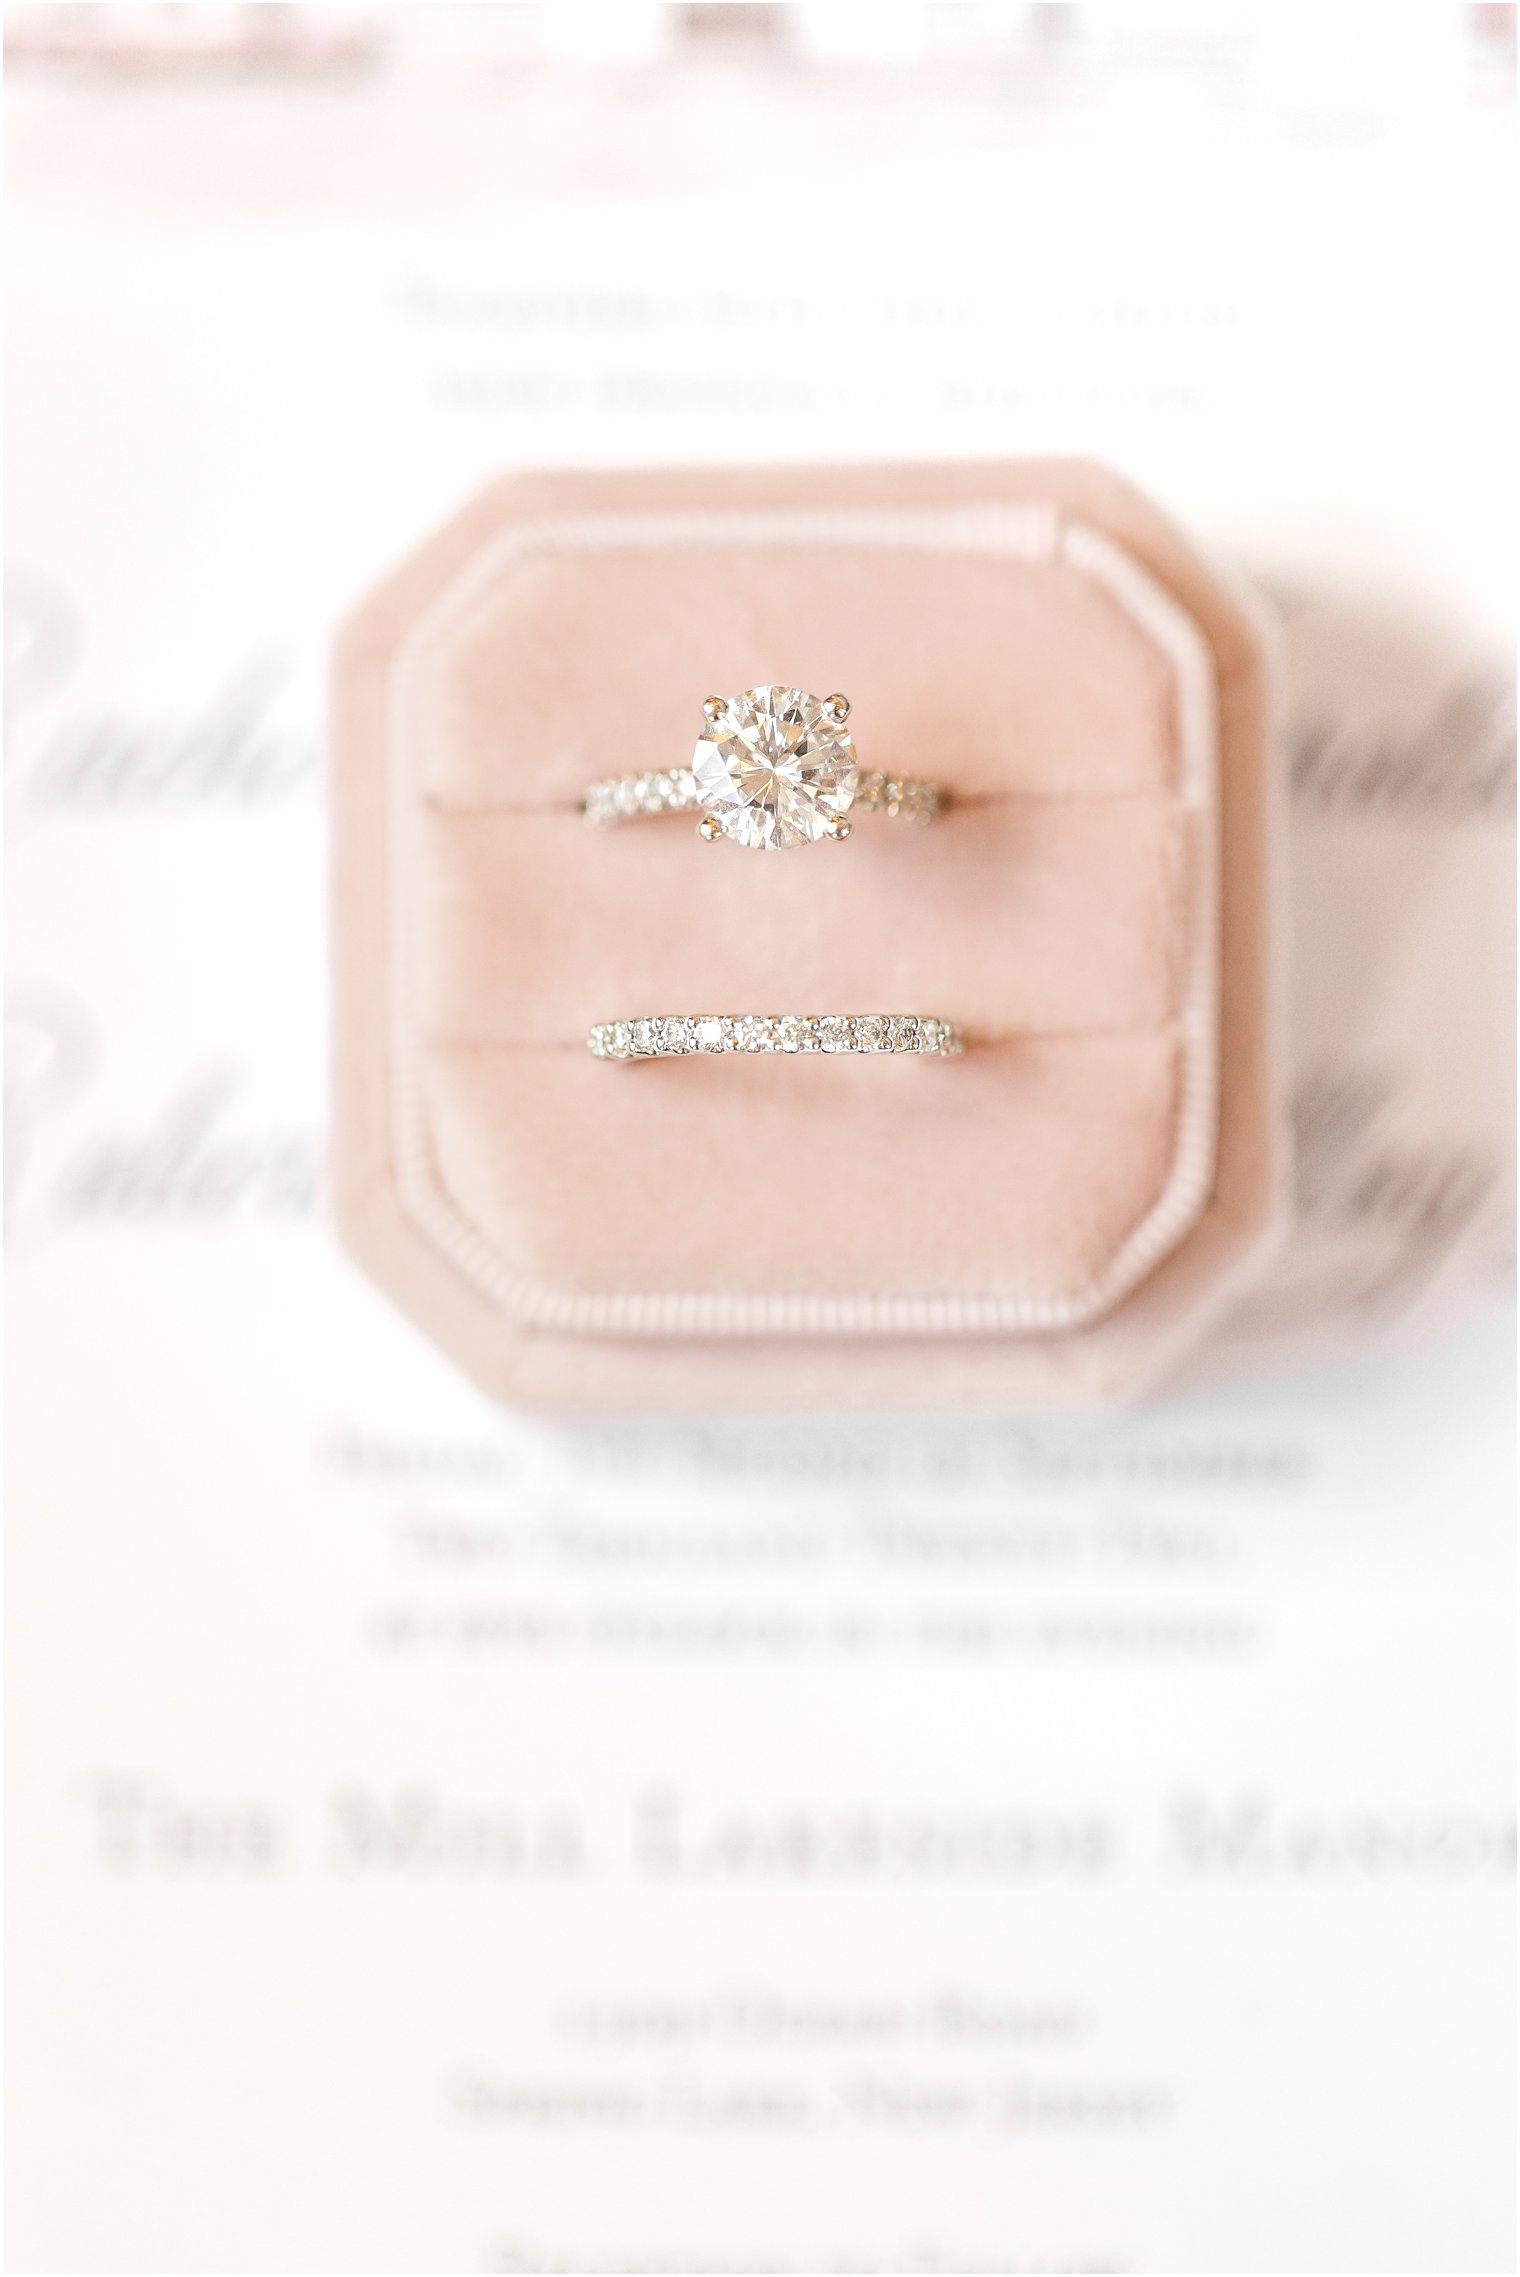 bride's ring rests in pink box before fall wedding at the Mill Lakeside Manor